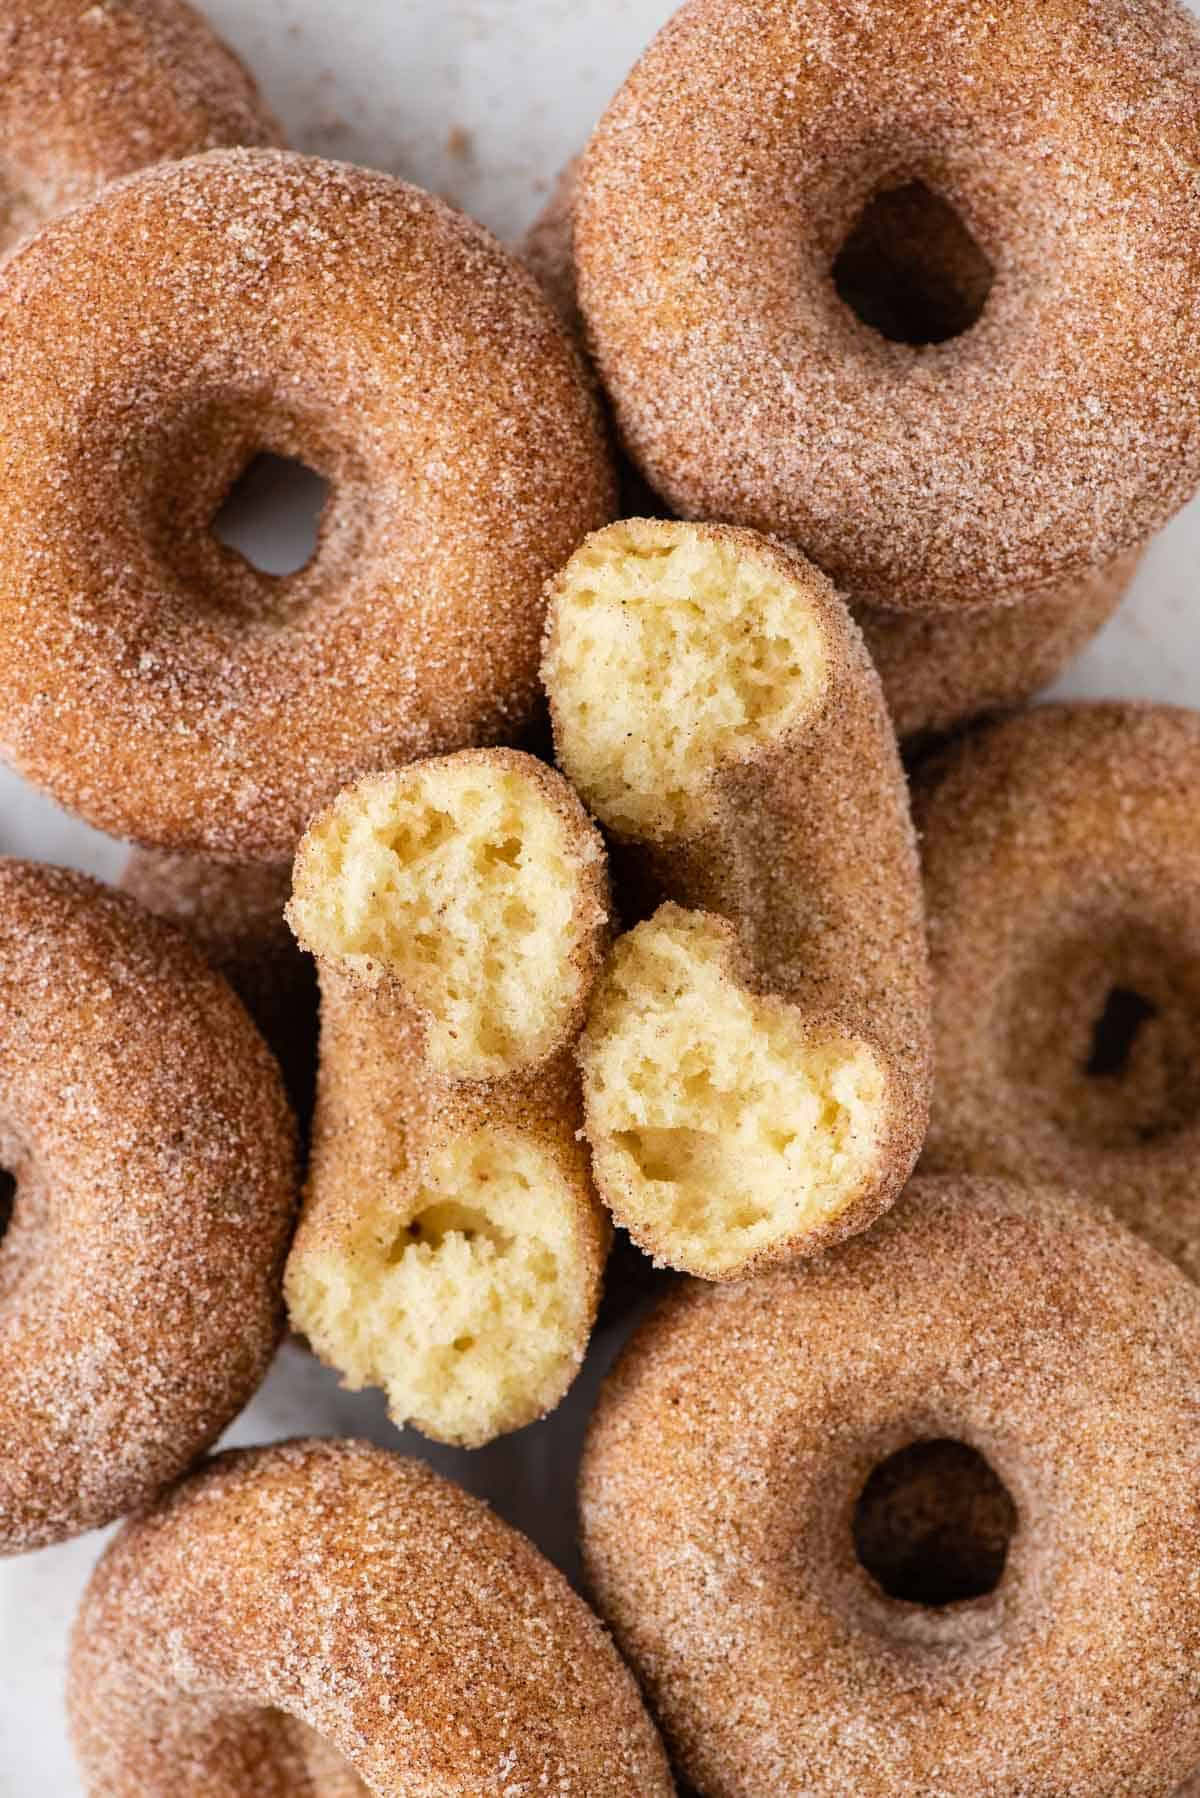 Cinnamon Sugar Donuts arranged in a pile on white background 